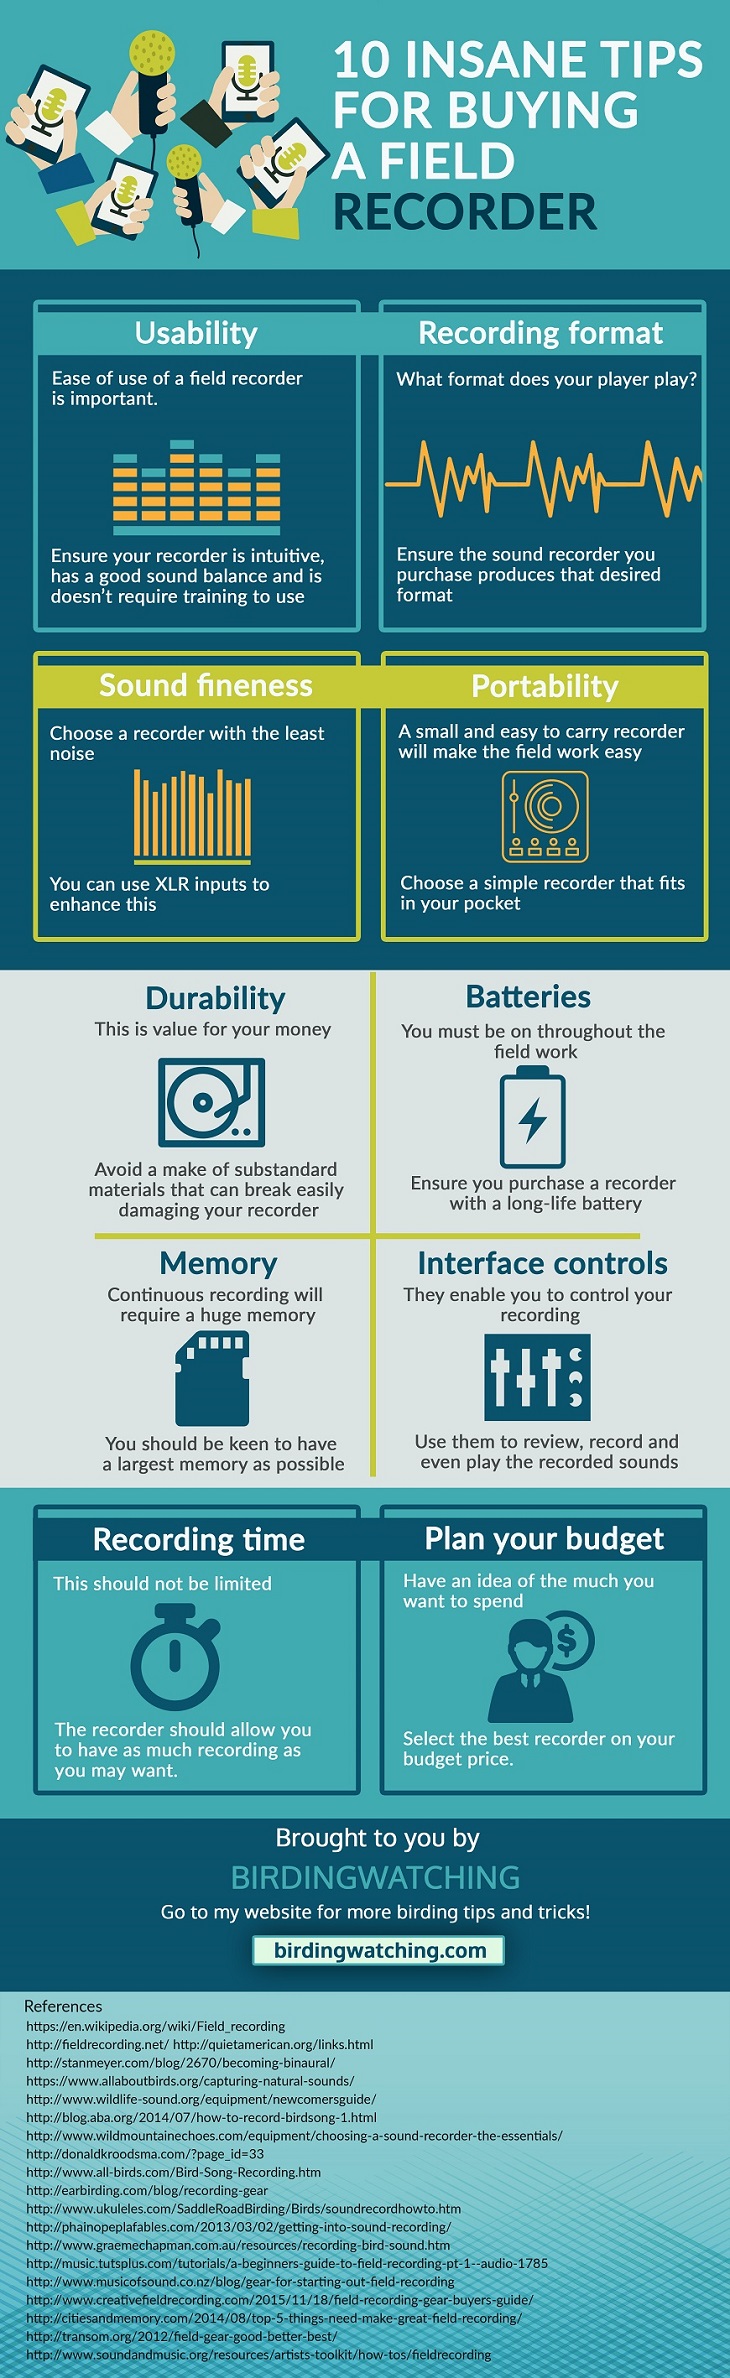 field_recorder_infographic_large